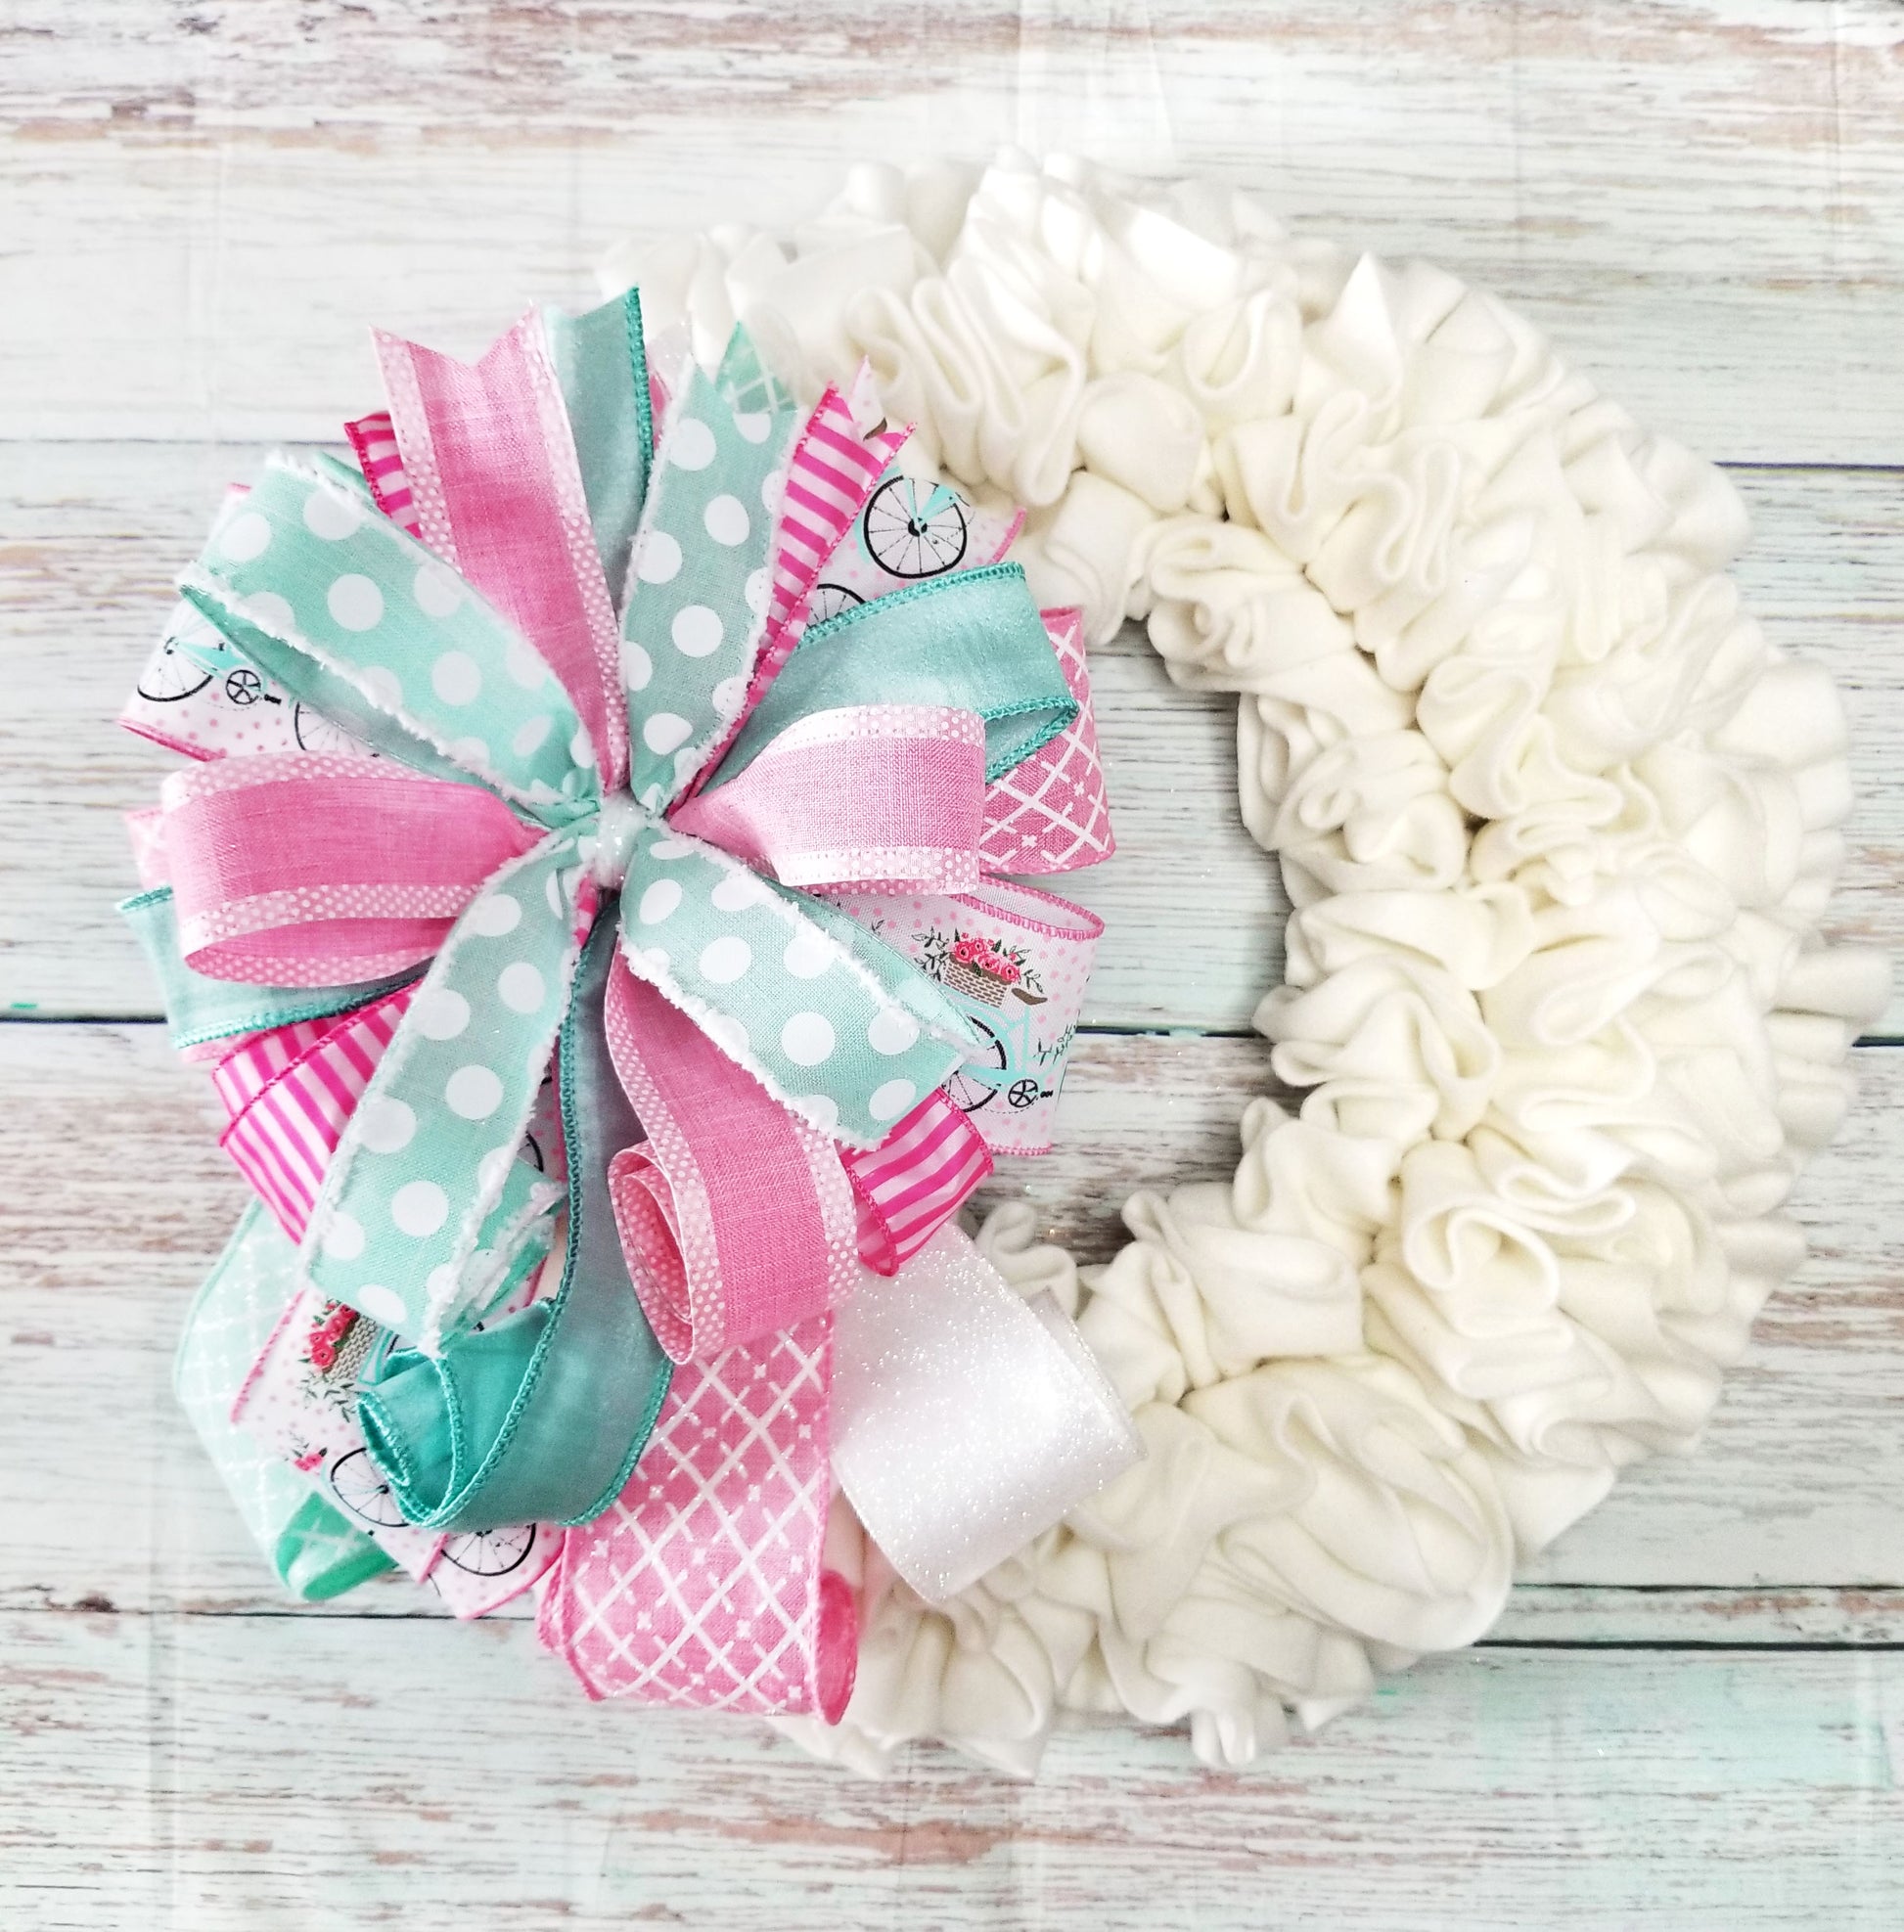 Floral Bow Making Kit, Advanced